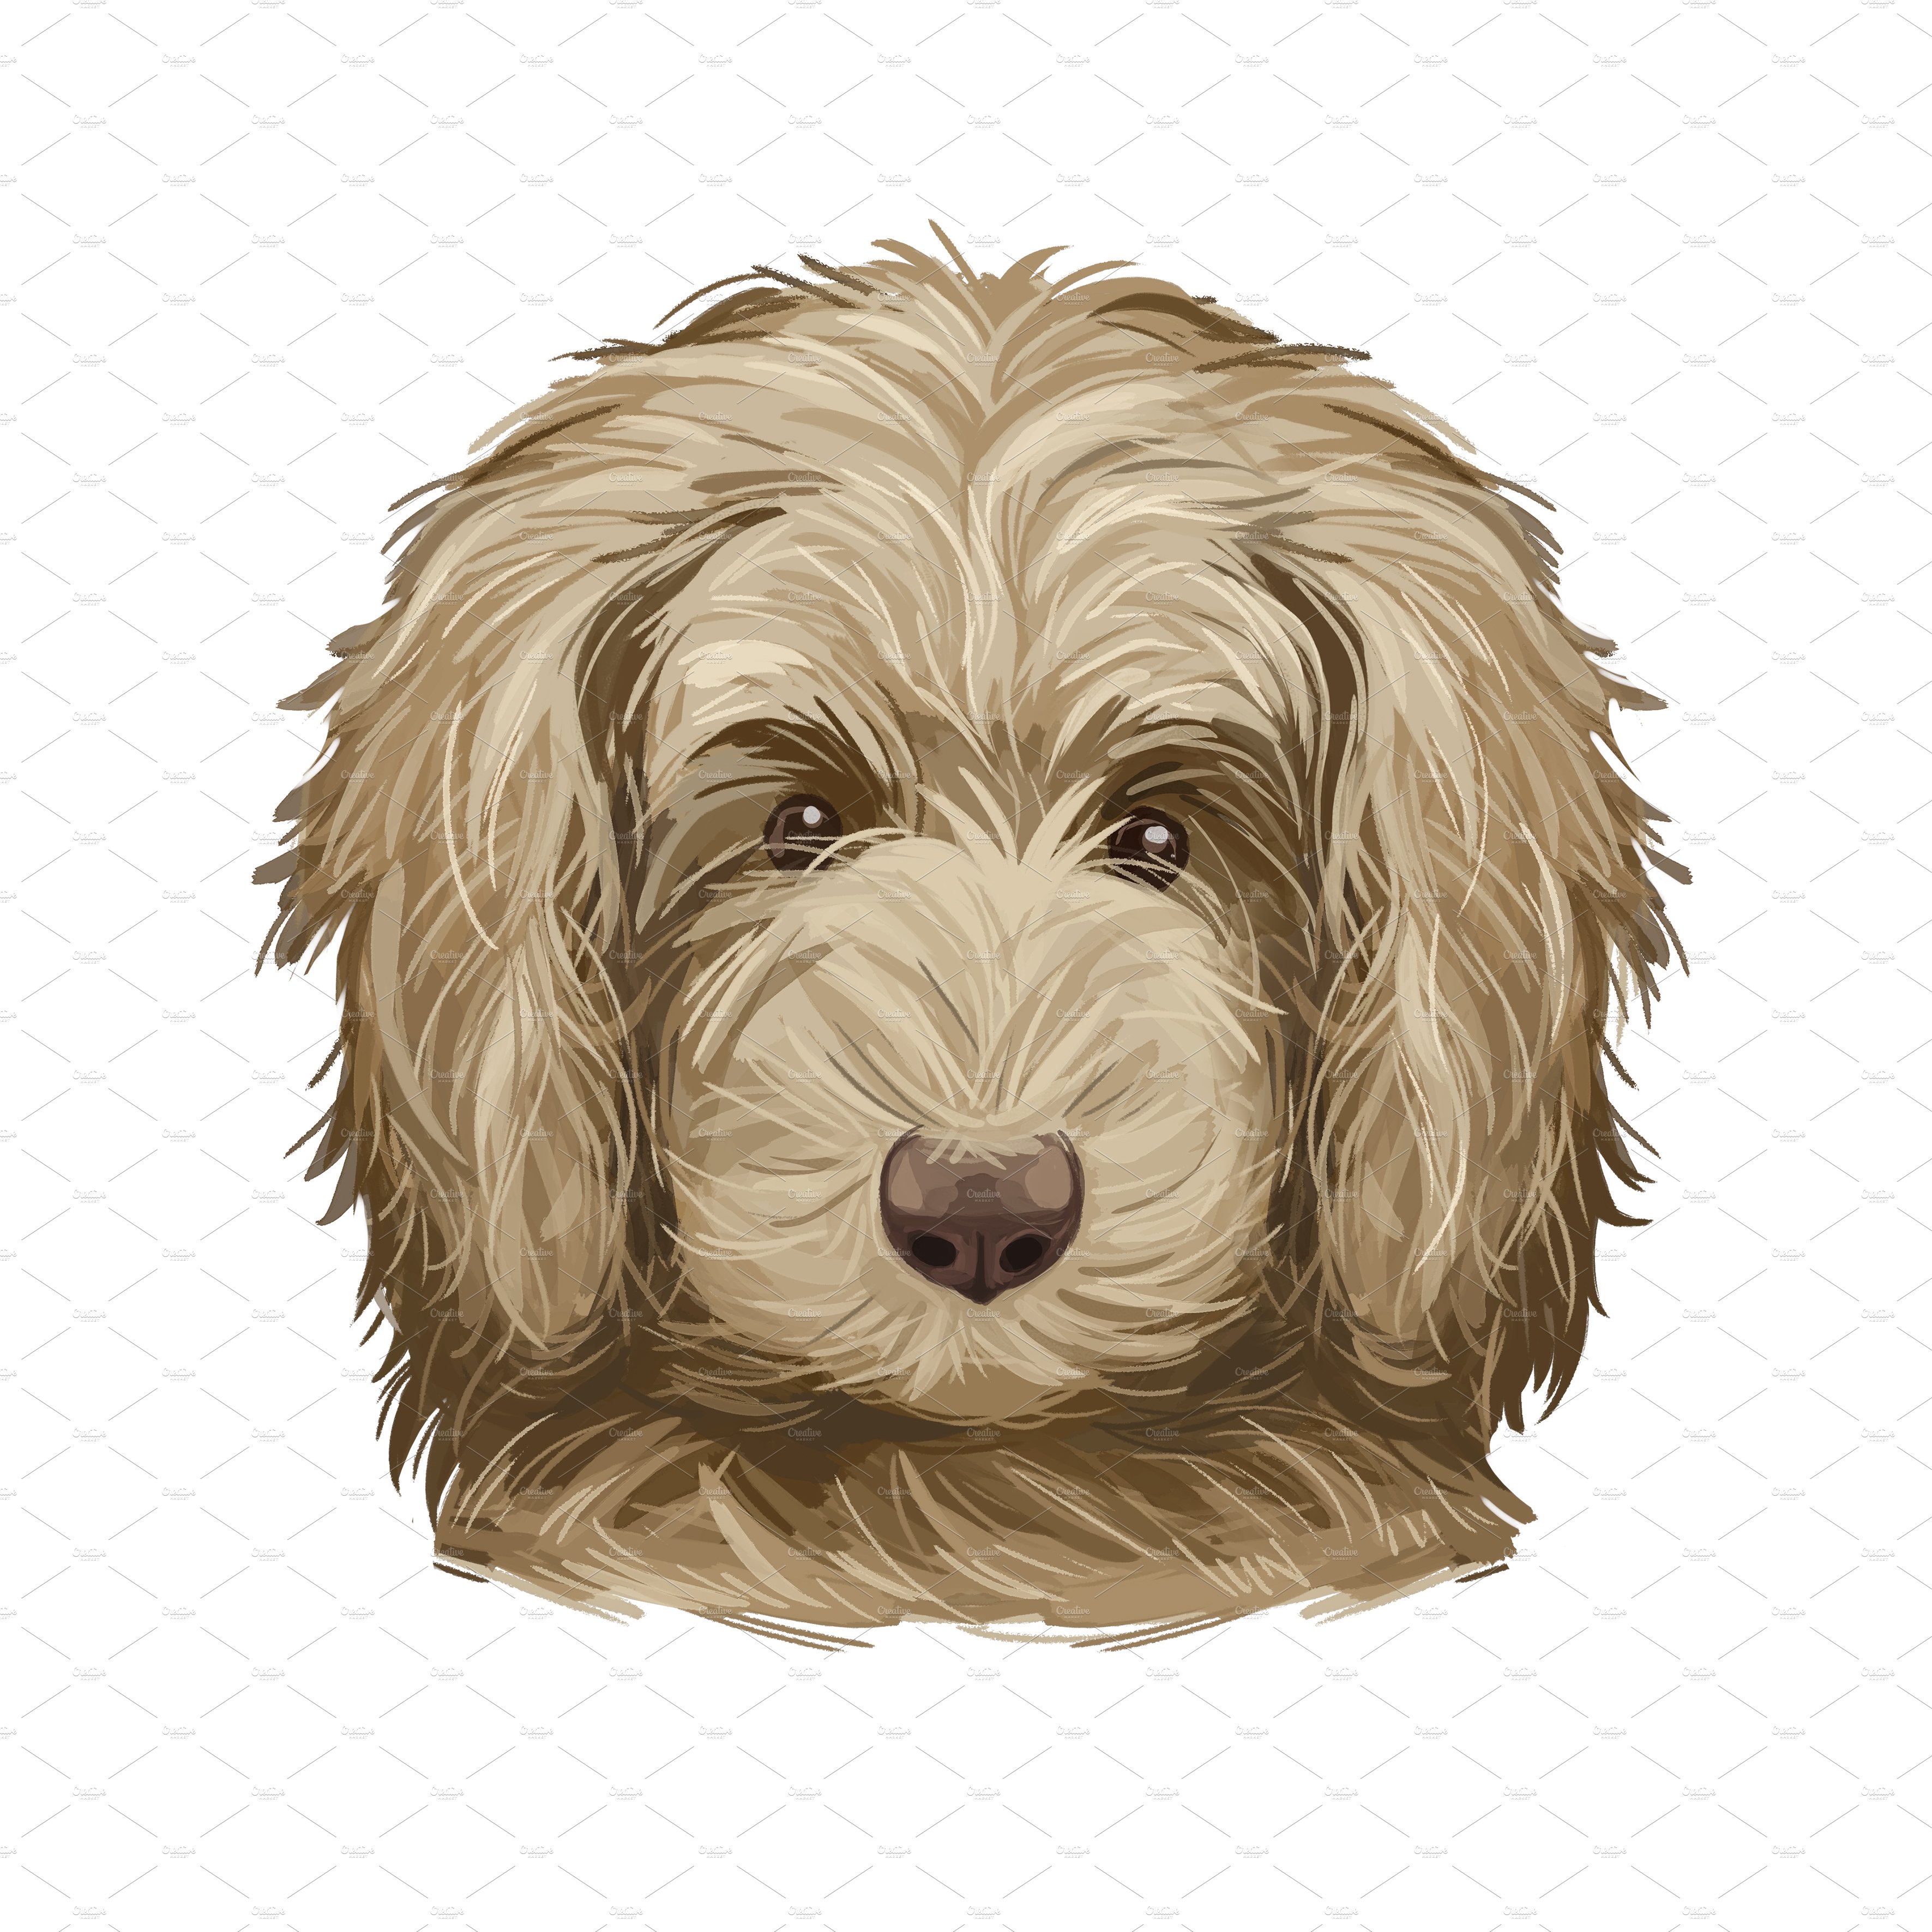 7. goldendoodle puppy 28129 684